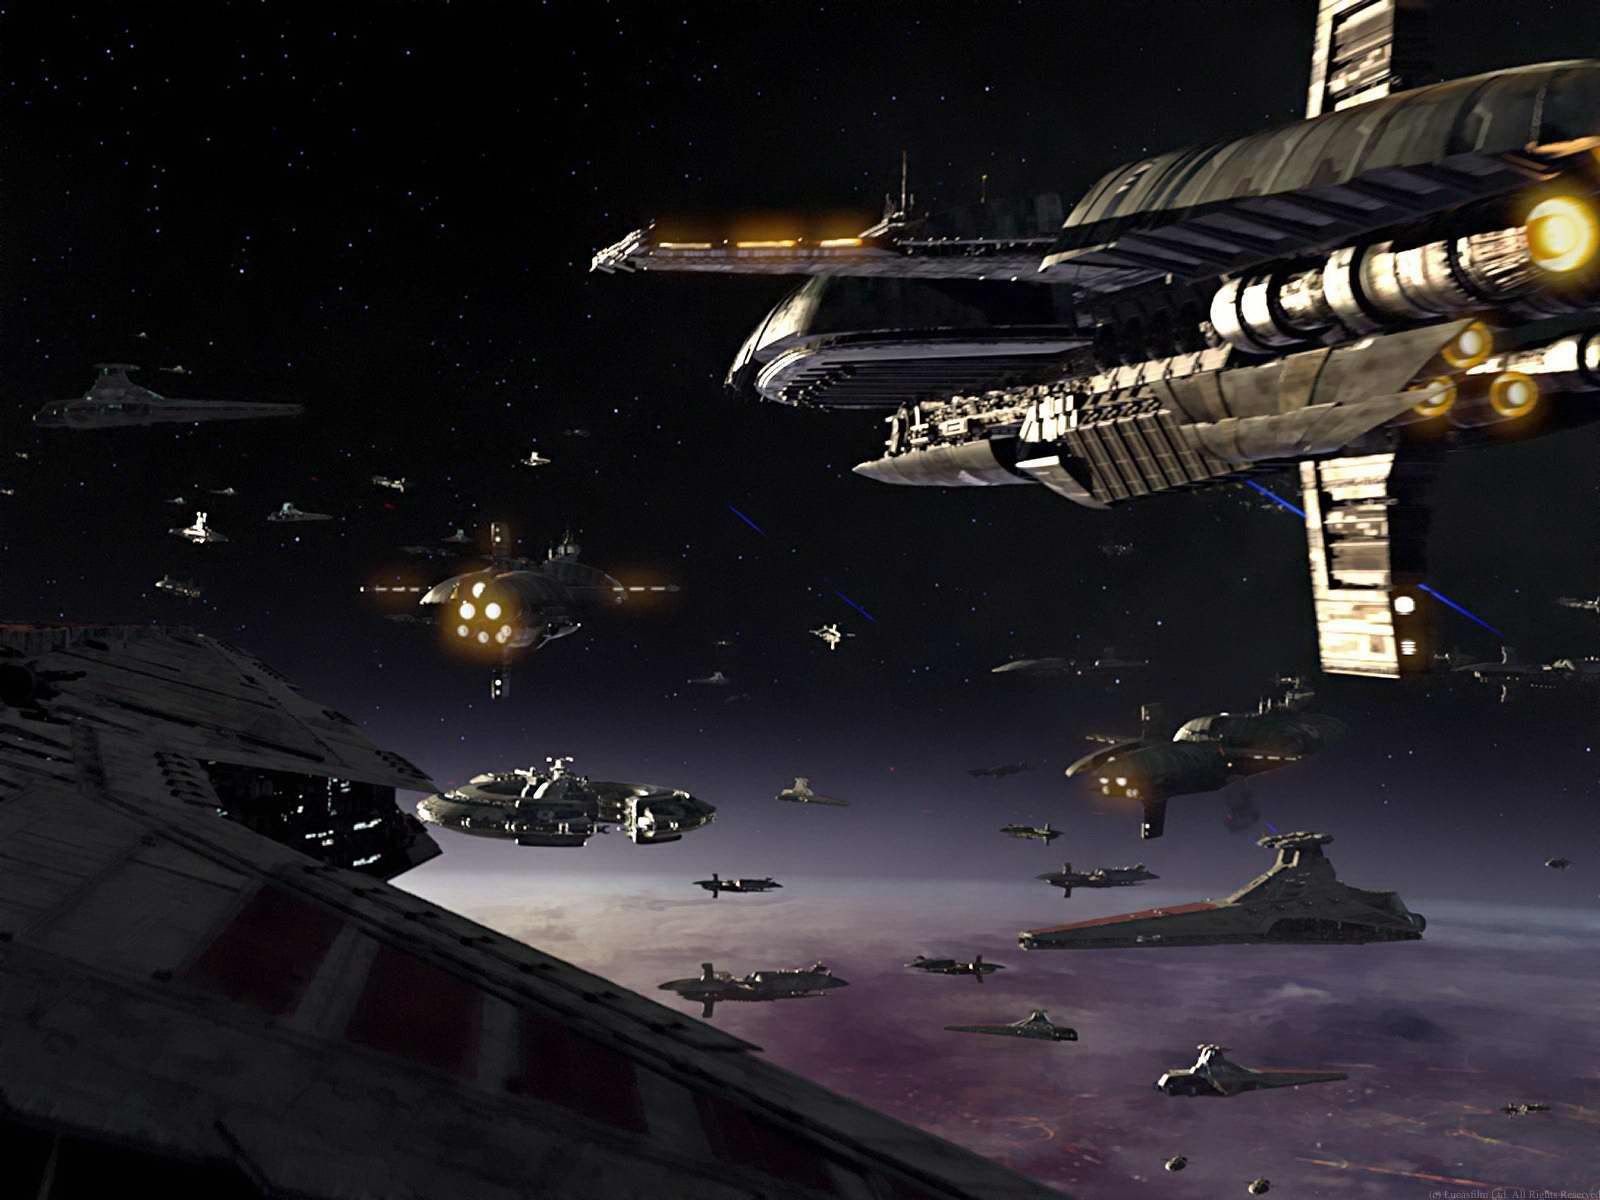 Space Battle Wallpaper to Cover Your Desktop in Glory. Space battles, Star wars ships, Star wars